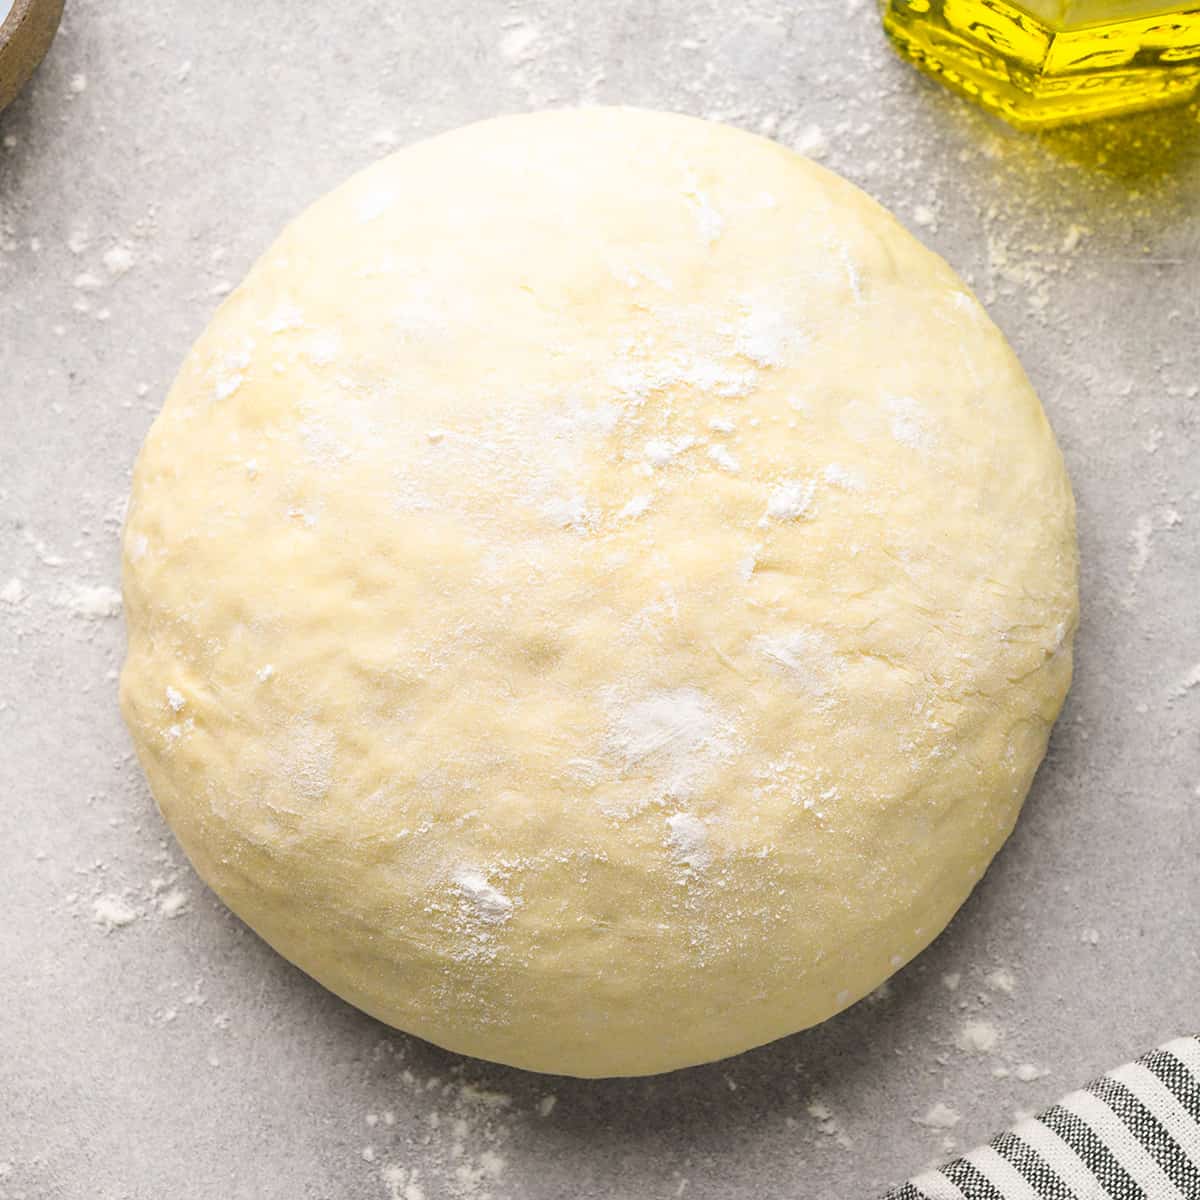 Homemade Pizza Dough Recipe after it has been kneaded and formed into a ball